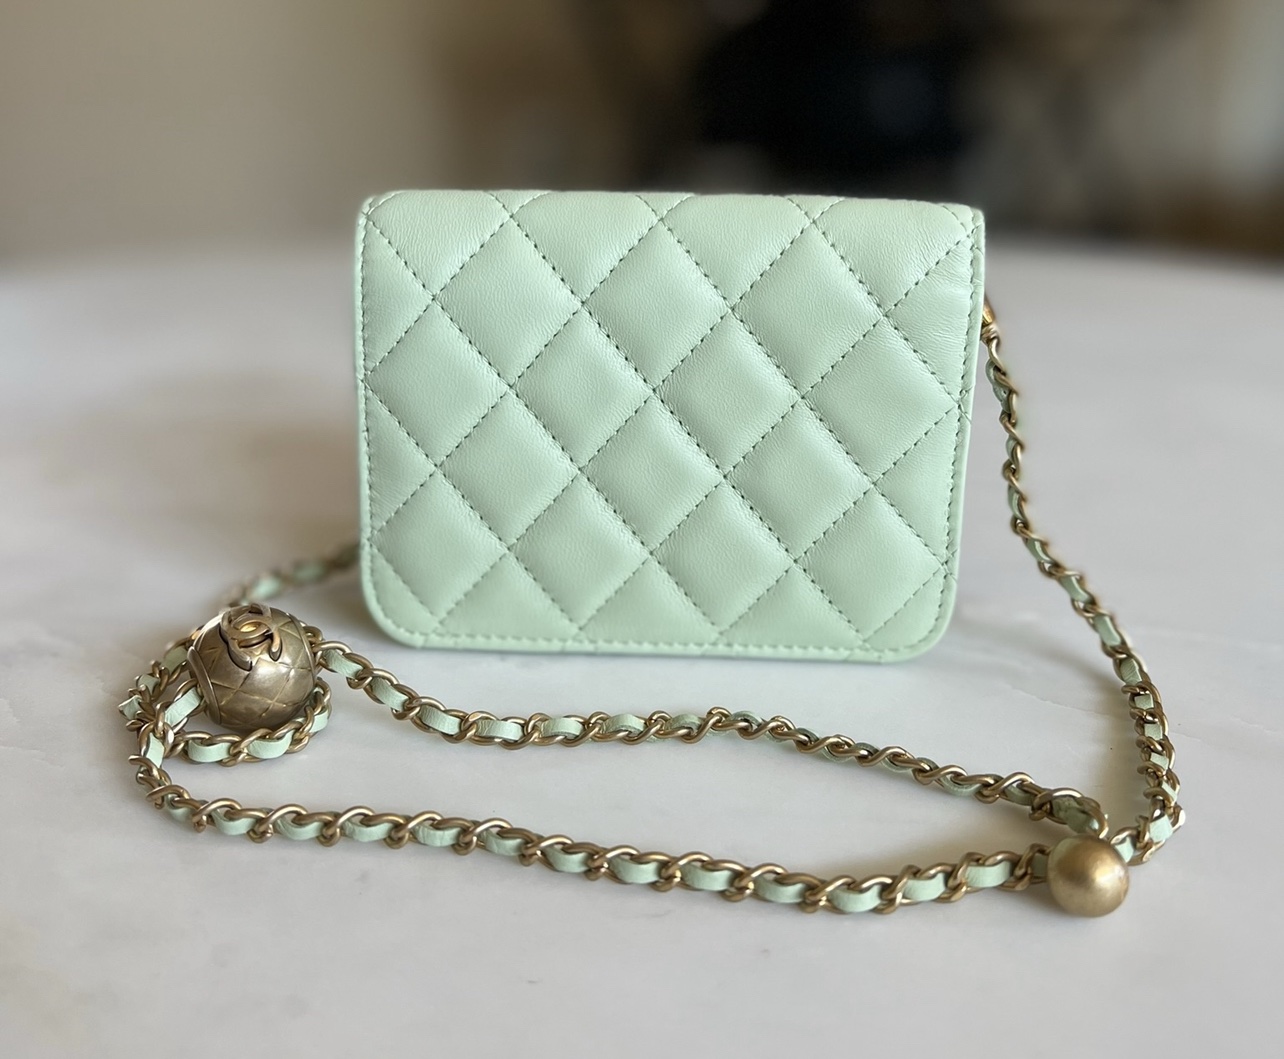 Chanel Metallic Green Quilted Caviar Classic Long Zip Pouch Pale Gold Hardware, 2018 (Very Good), Womens Handbag